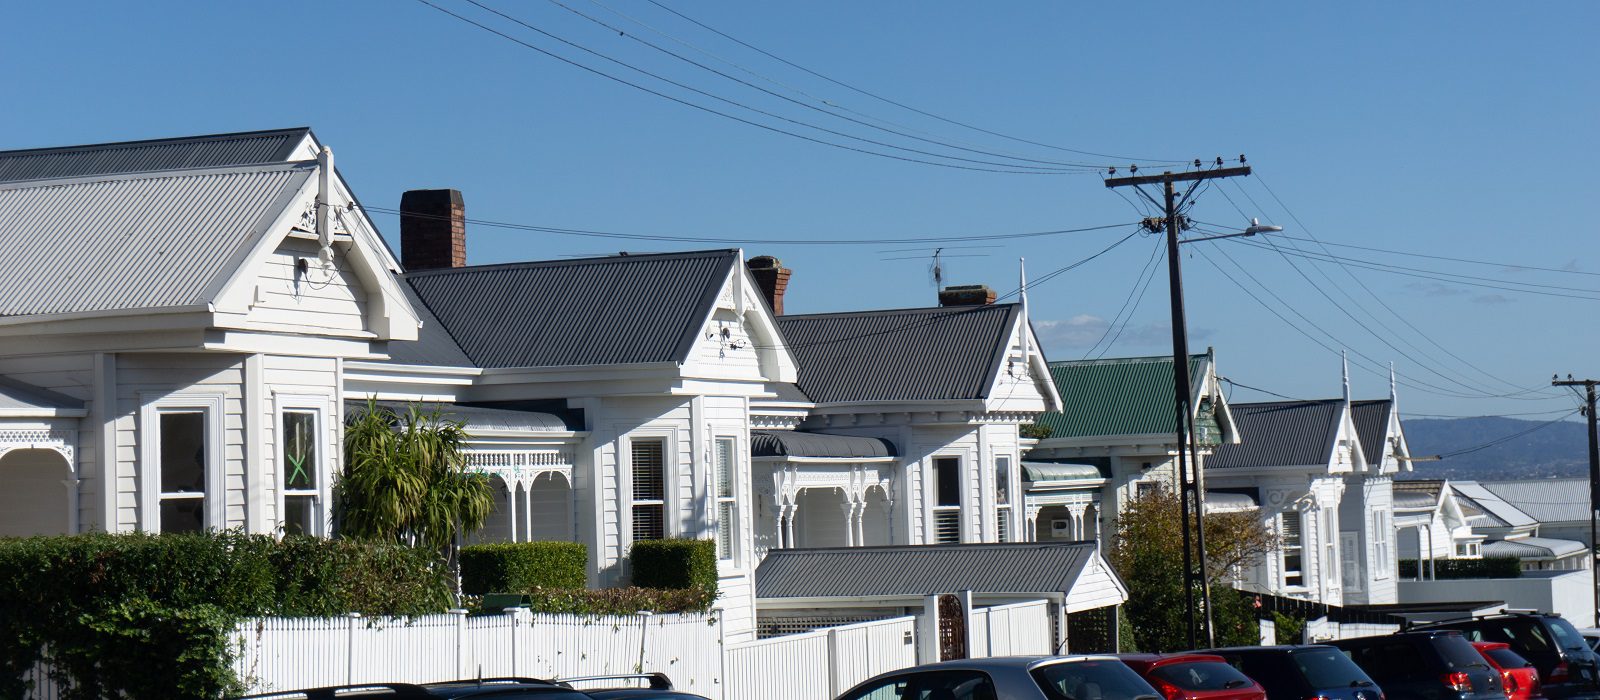 1940's  row of residential villa gables in traditional and established urban suburban street in Ponsonby Auckland New Zealand.